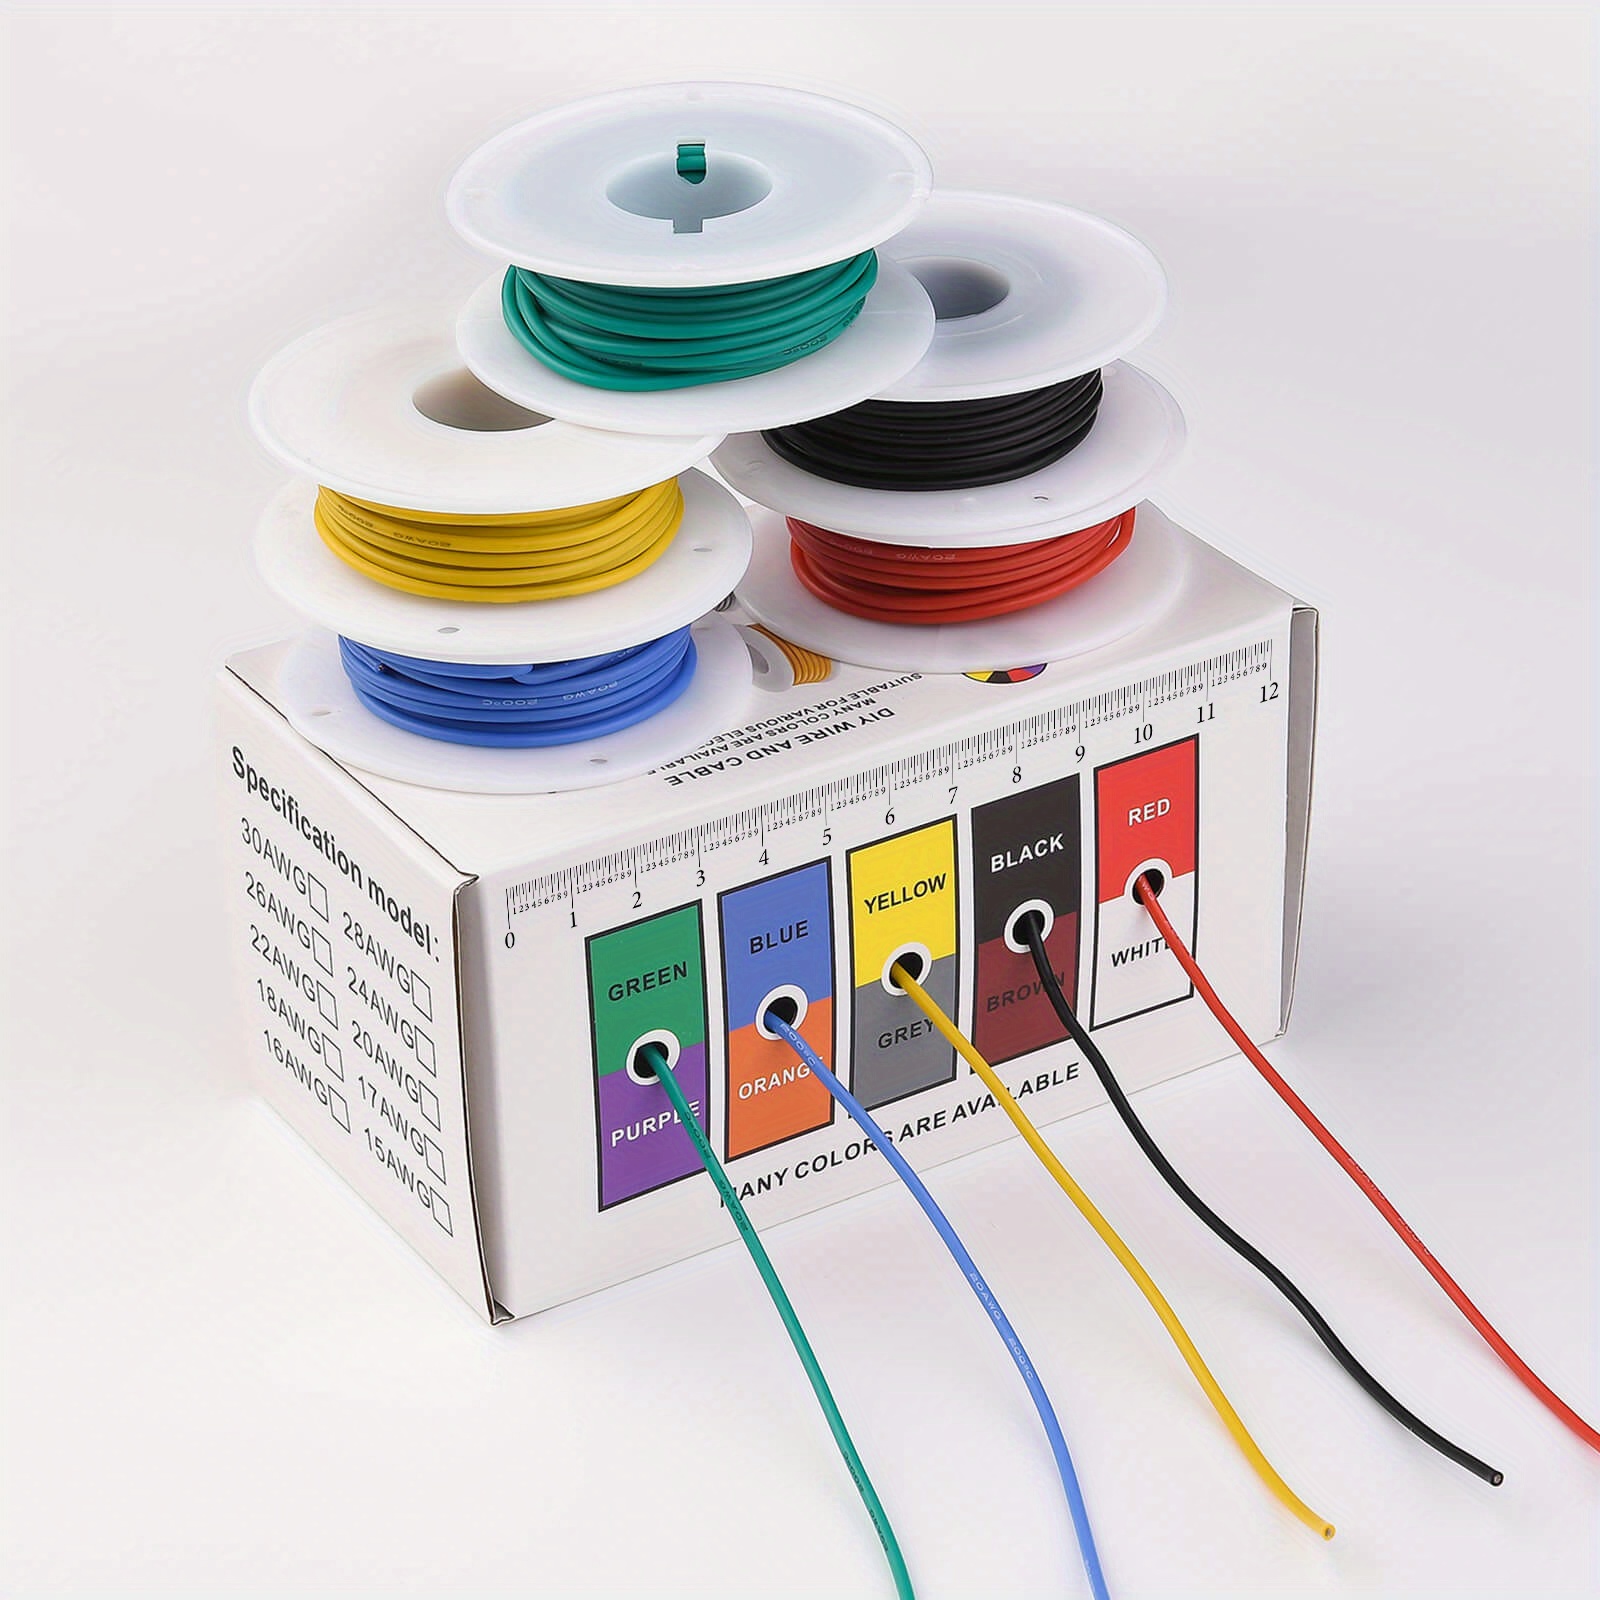 20 AWG Flexible Silicone Solid Wire Kit Box Electric wire 20 Gauge